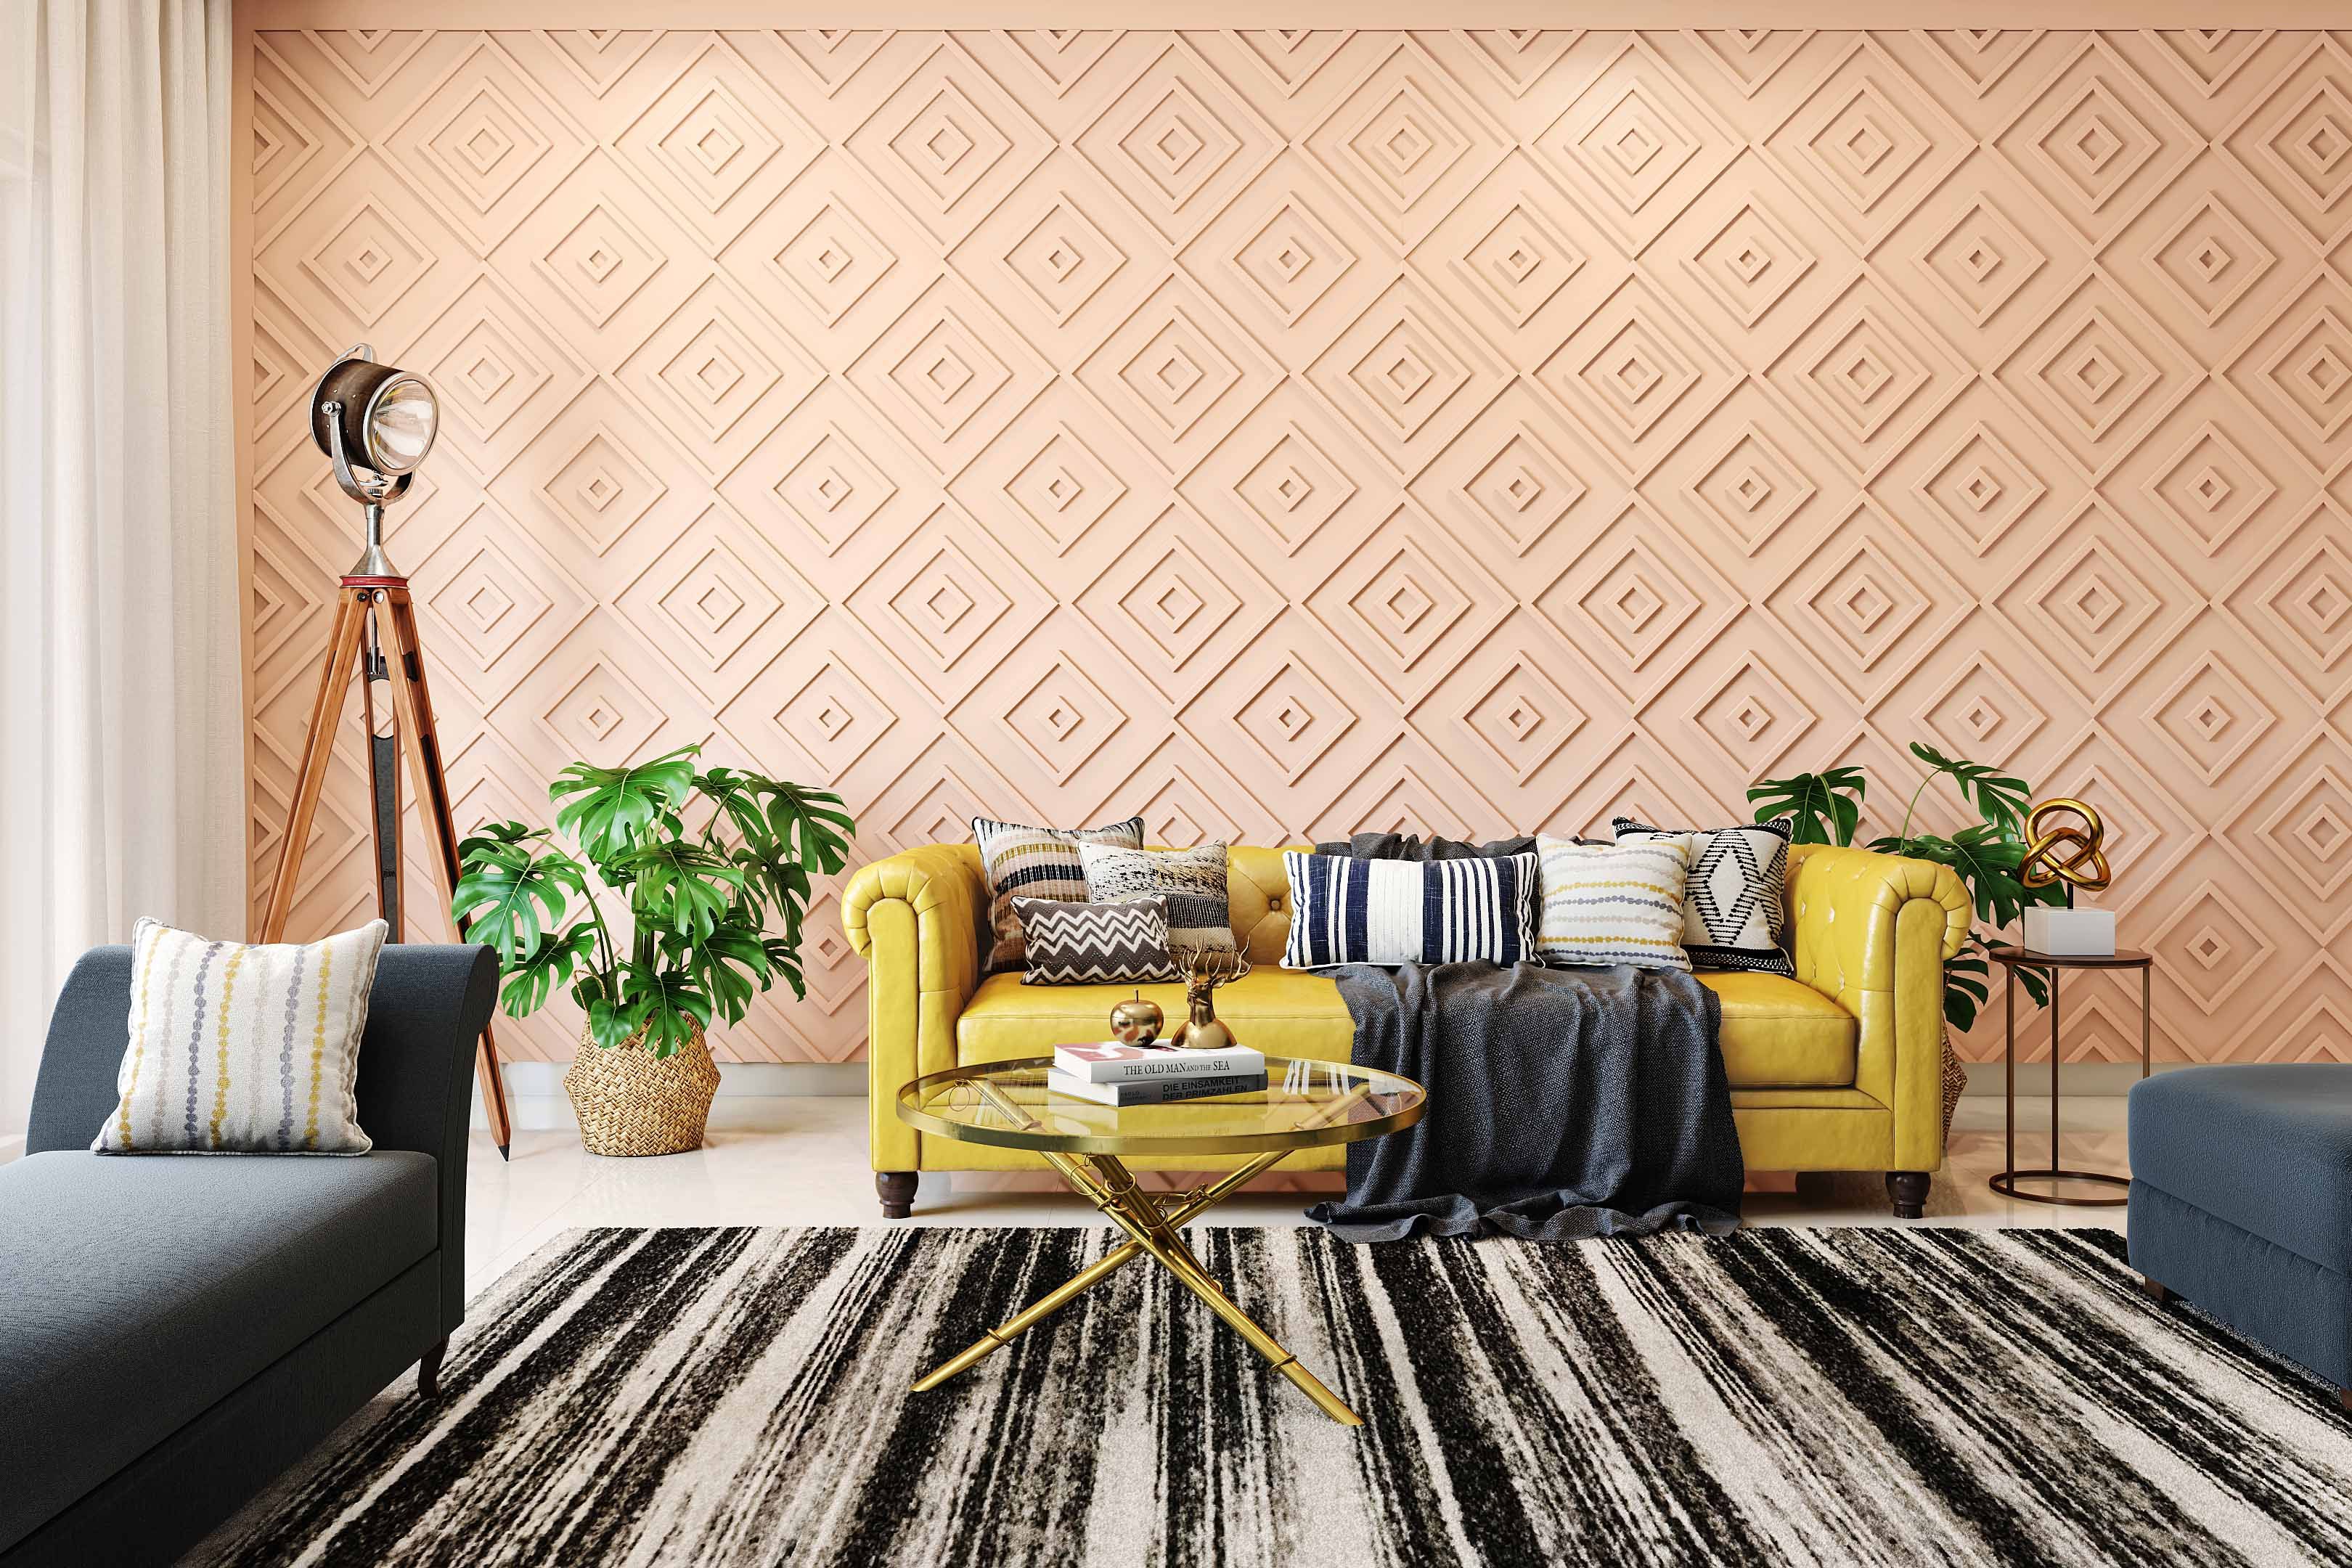 Contemporary Peach Living Room Wall Design With Concentric Diamond Patterning